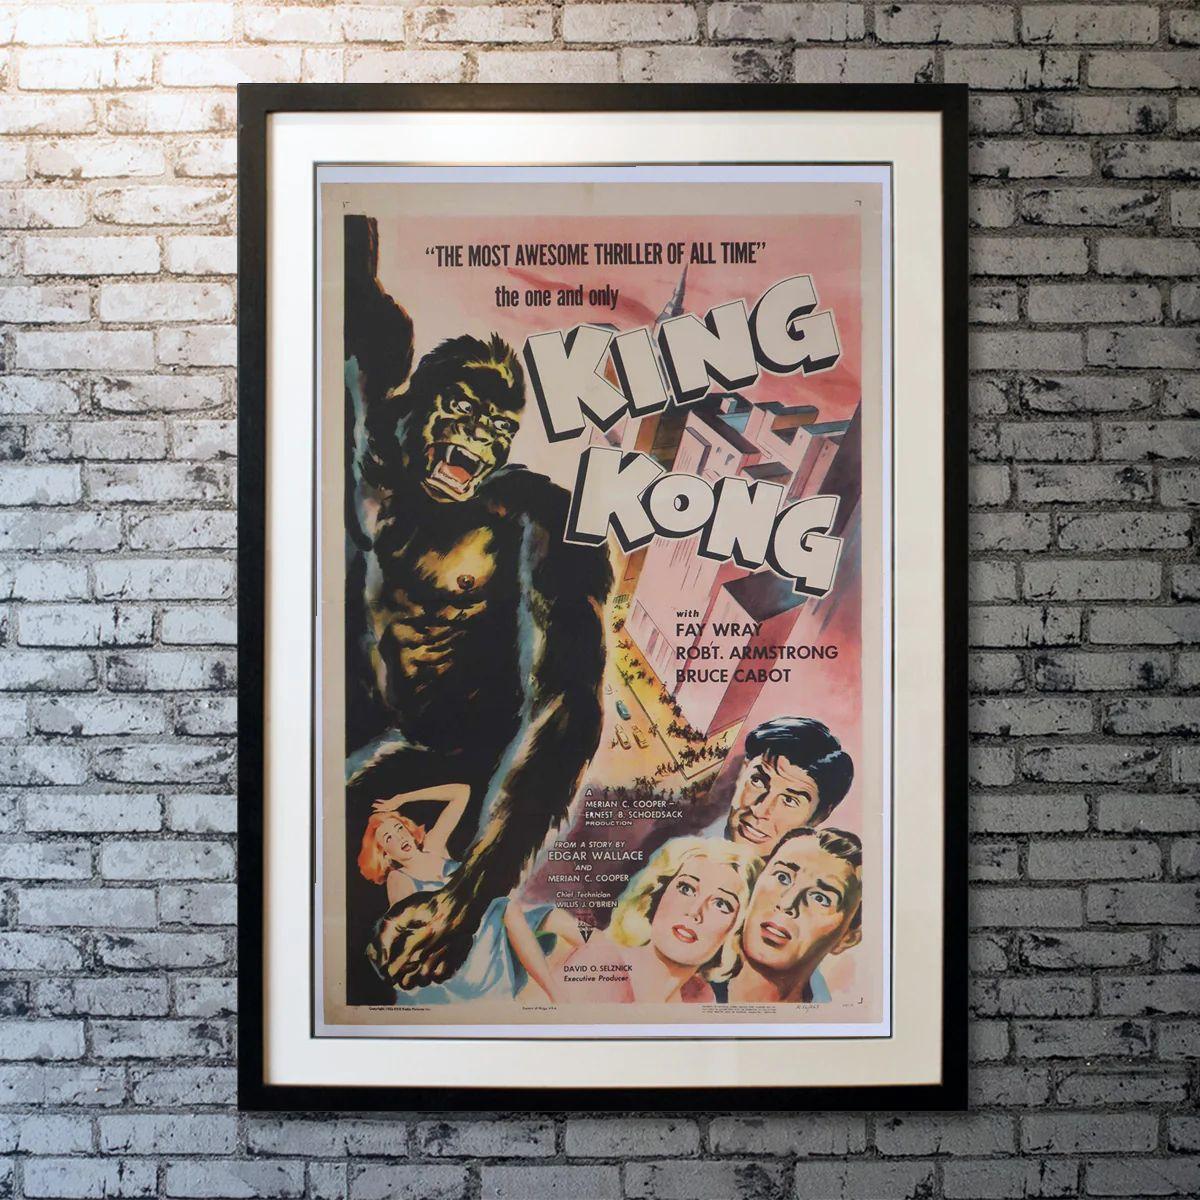 King Kong, Unframed Poster, 1956R

Original One Sheet (27 X 41 Inches). A film crew goes to a tropical island for an exotic location shoot and discovers a colossal ape who takes a shine to their female blonde star. He is then captured and brought